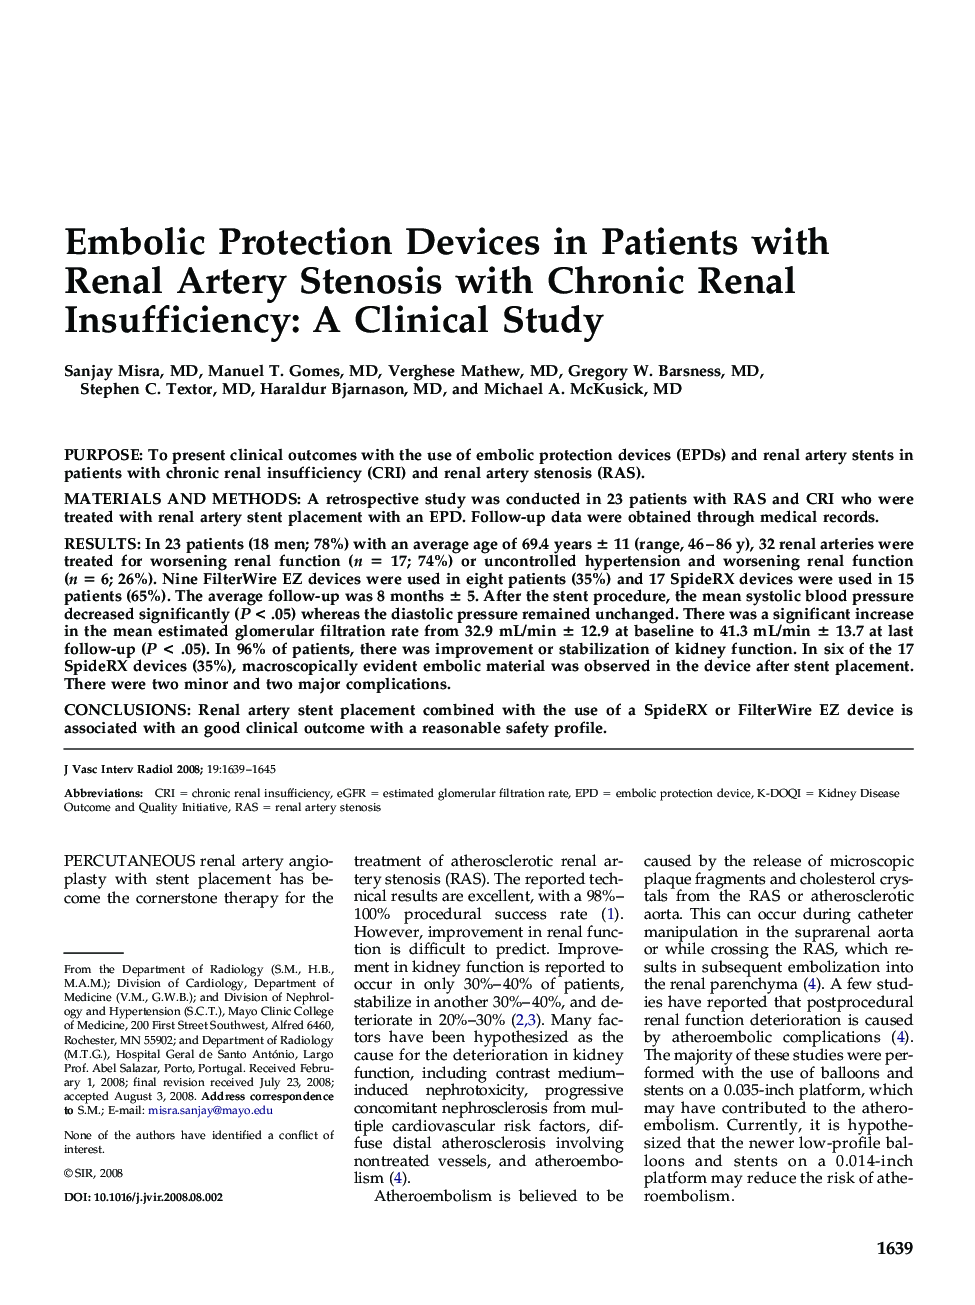 Embolic Protection Devices in Patients with Renal Artery Stenosis with Chronic Renal Insufficiency: A Clinical Study